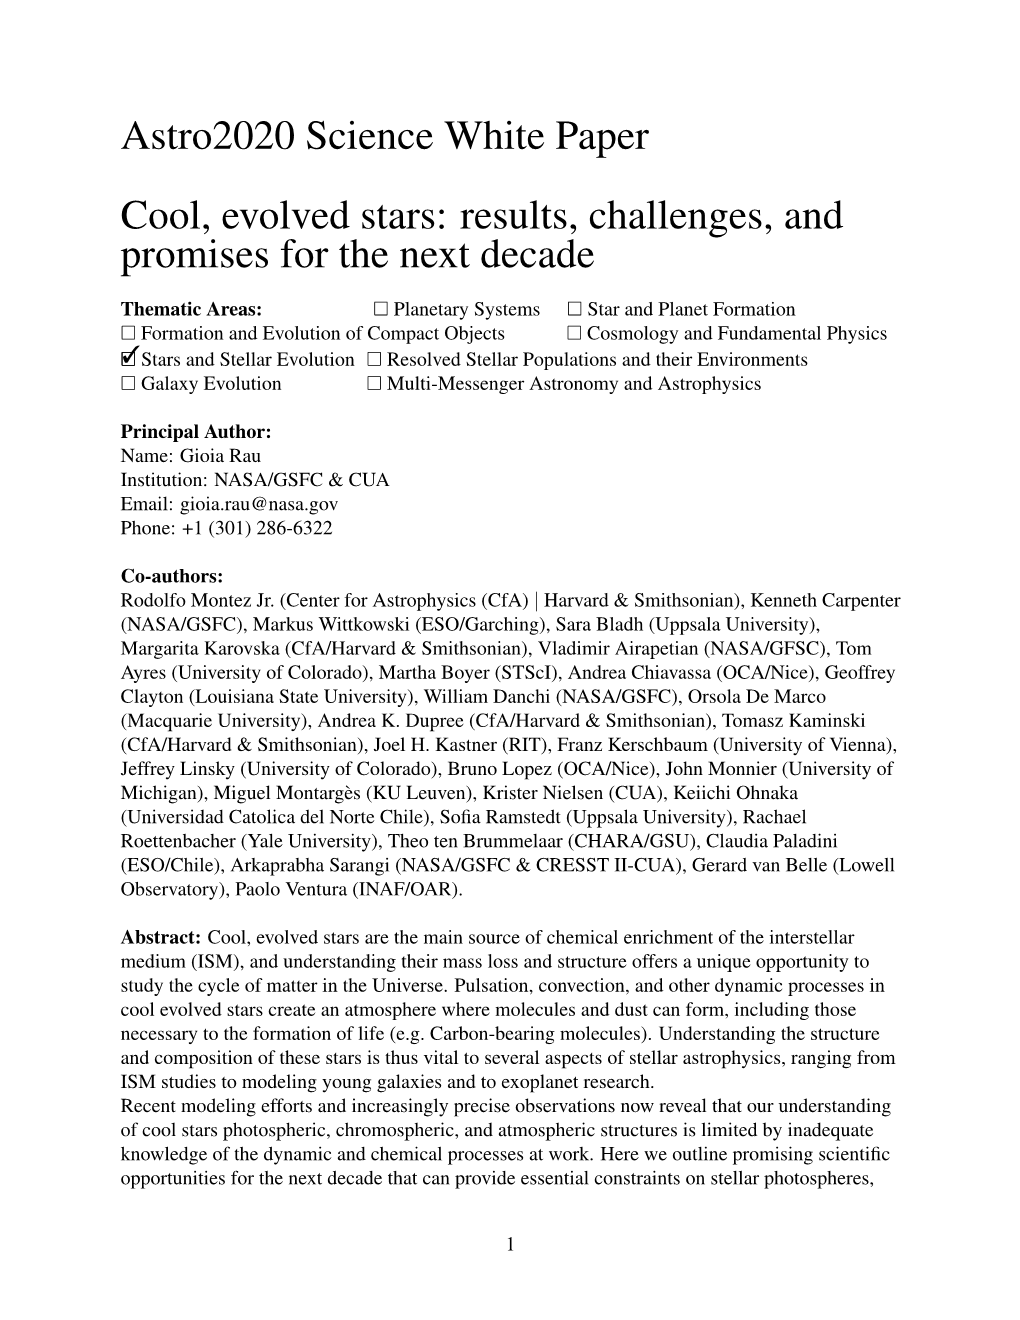 Astro2020 Science White Paper Cool, Evolved Stars: Results, Challenges, and Promises for the Next Decade